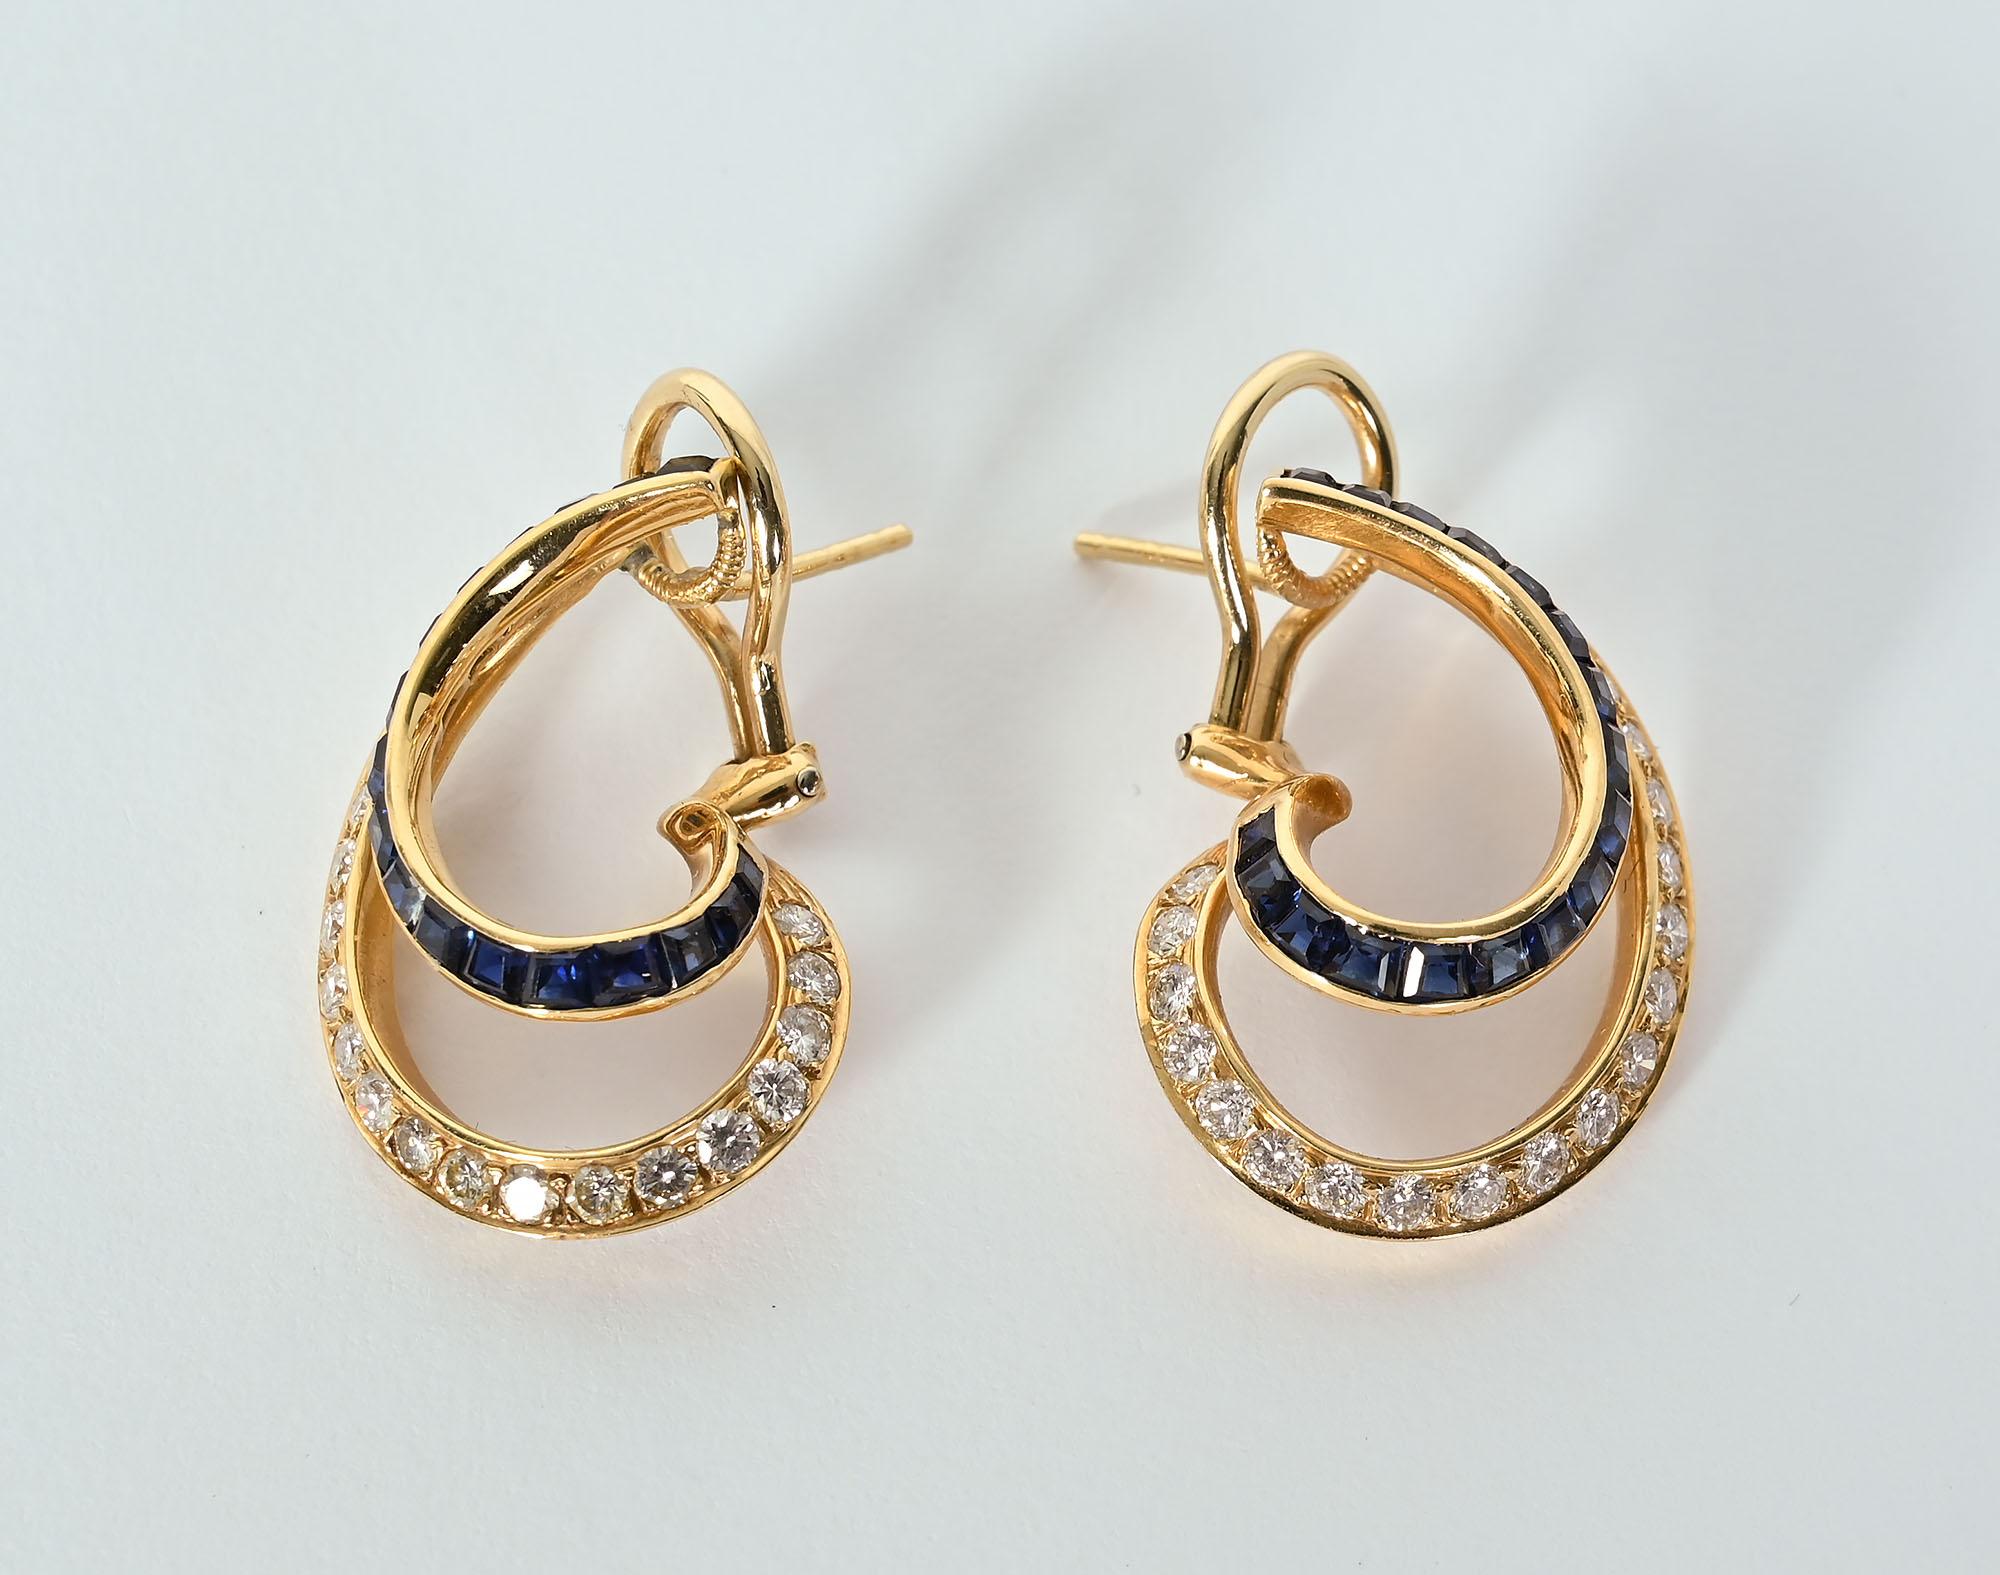 Delicate and graceful diamond and sapphire earrings by Oscar Heyman. The earrings have approximately 1.5 carats of round brilliant diamonds; SI quality; G color. The sapphires weigh approximately 1 carat. The earrings are open and airy with a lovely